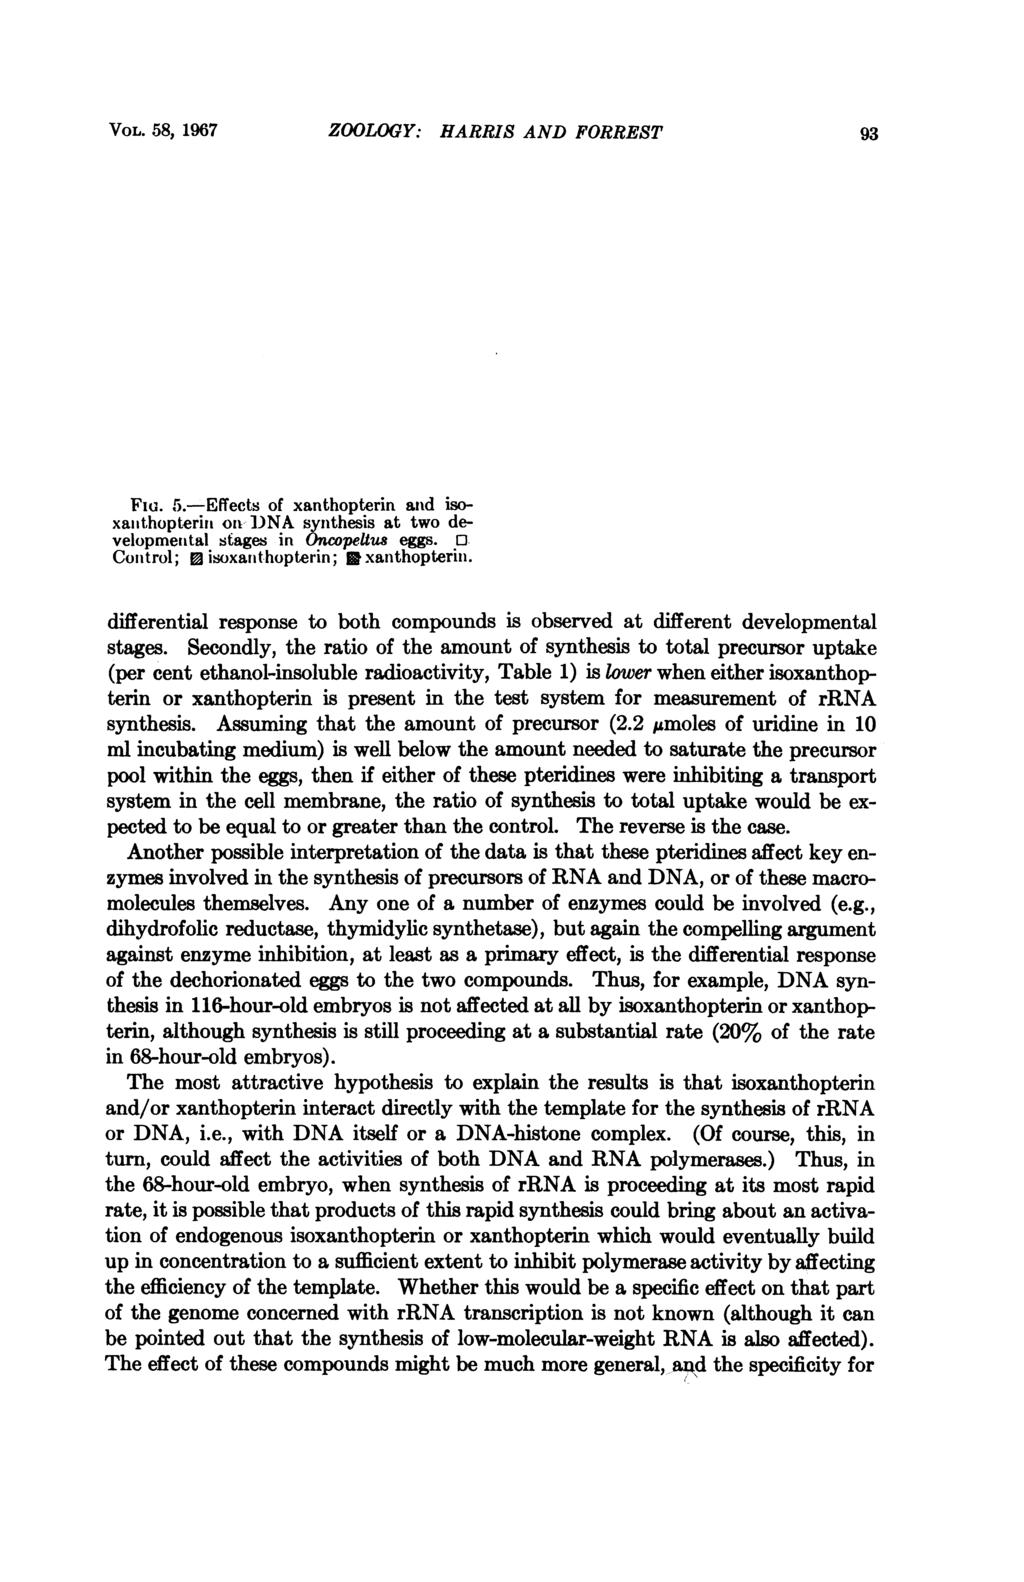 VOL. 58, 1967 ZOOLOGY: HARRIS AND FORREST 93 Fia. 5. Effects of xanthopterin and iso- MM xamithopterin on ])NA synthesis at two de- X velopmenital stages in Oncopeltus eggs.